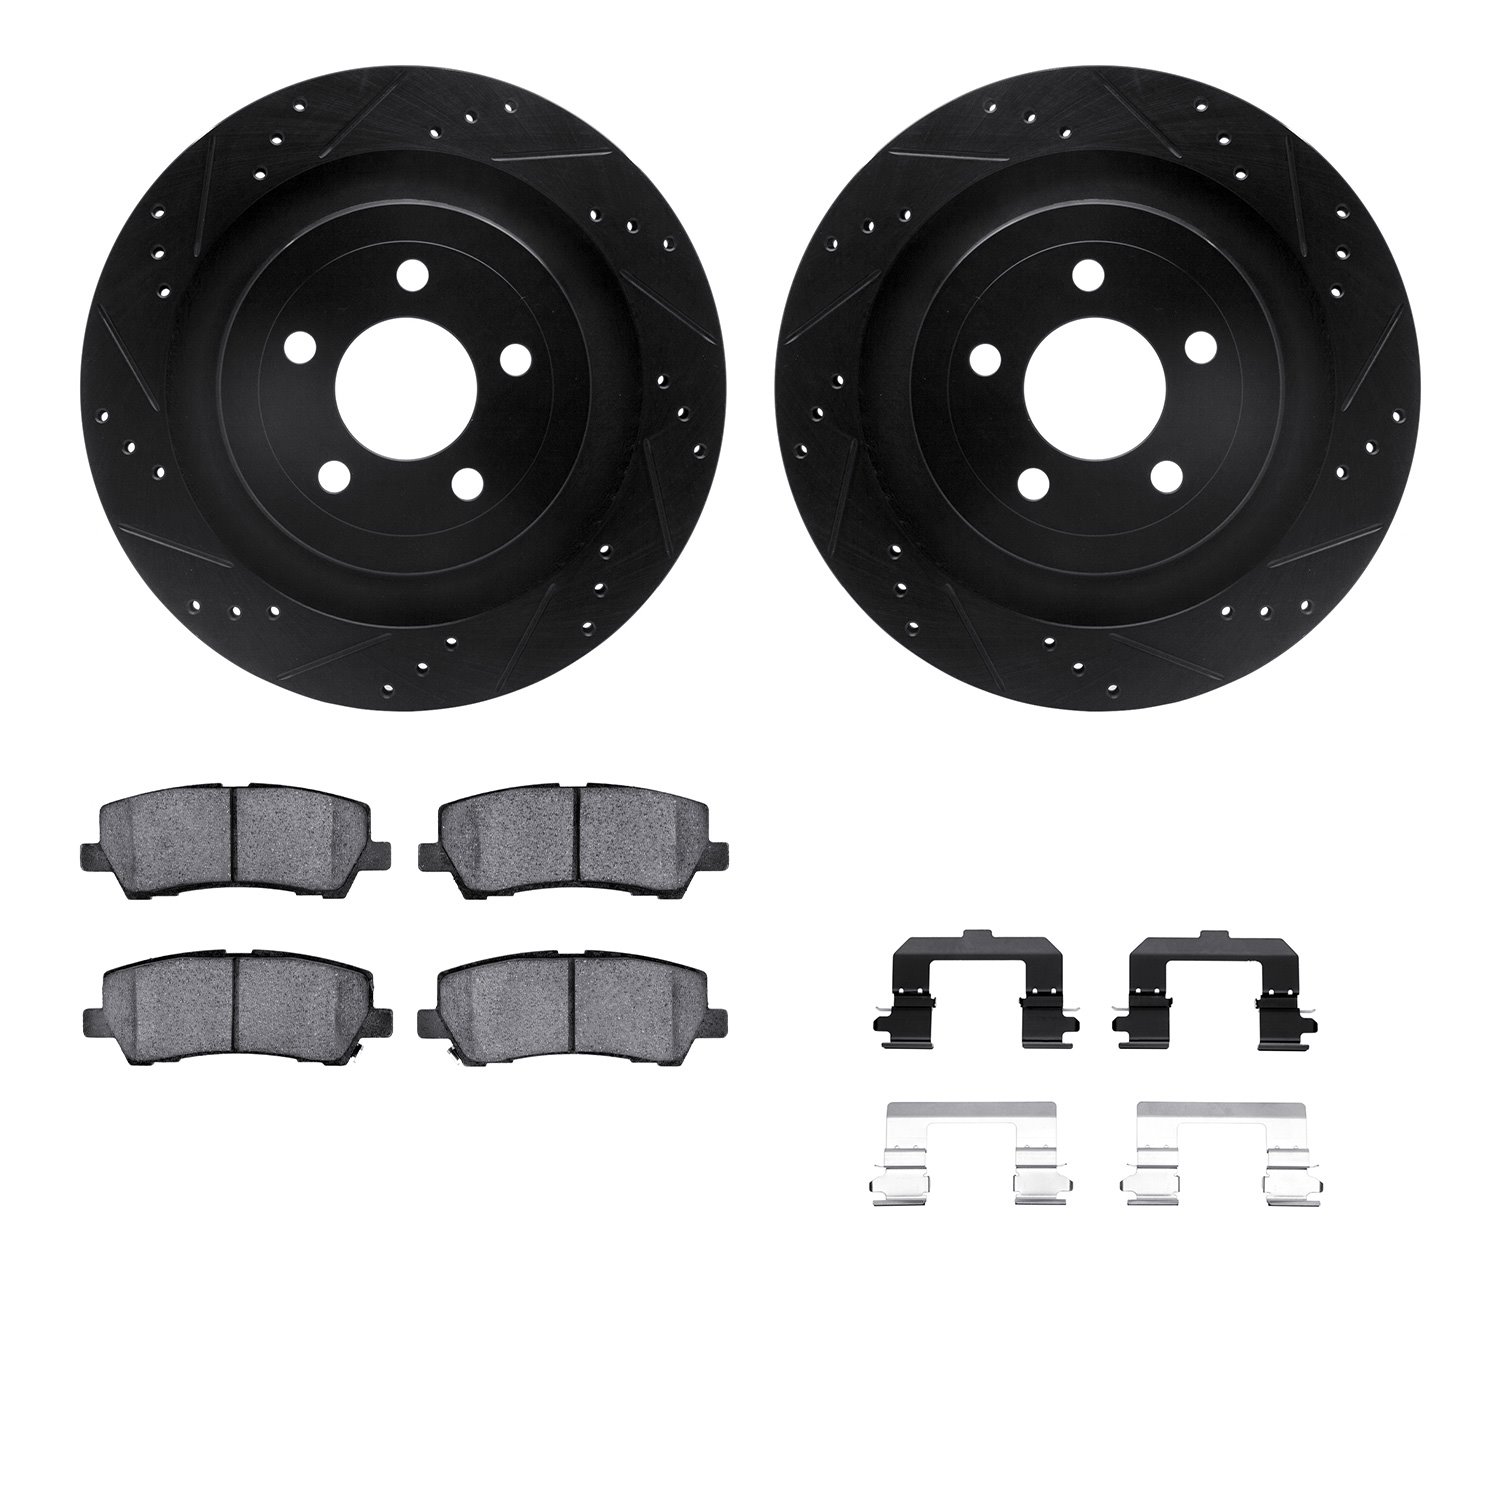 8312-54232 Drilled/Slotted Brake Rotors with 3000-Series Ceramic Brake Pads Kit & Hardware [Black], Fits Select Ford/Lincoln/Mer